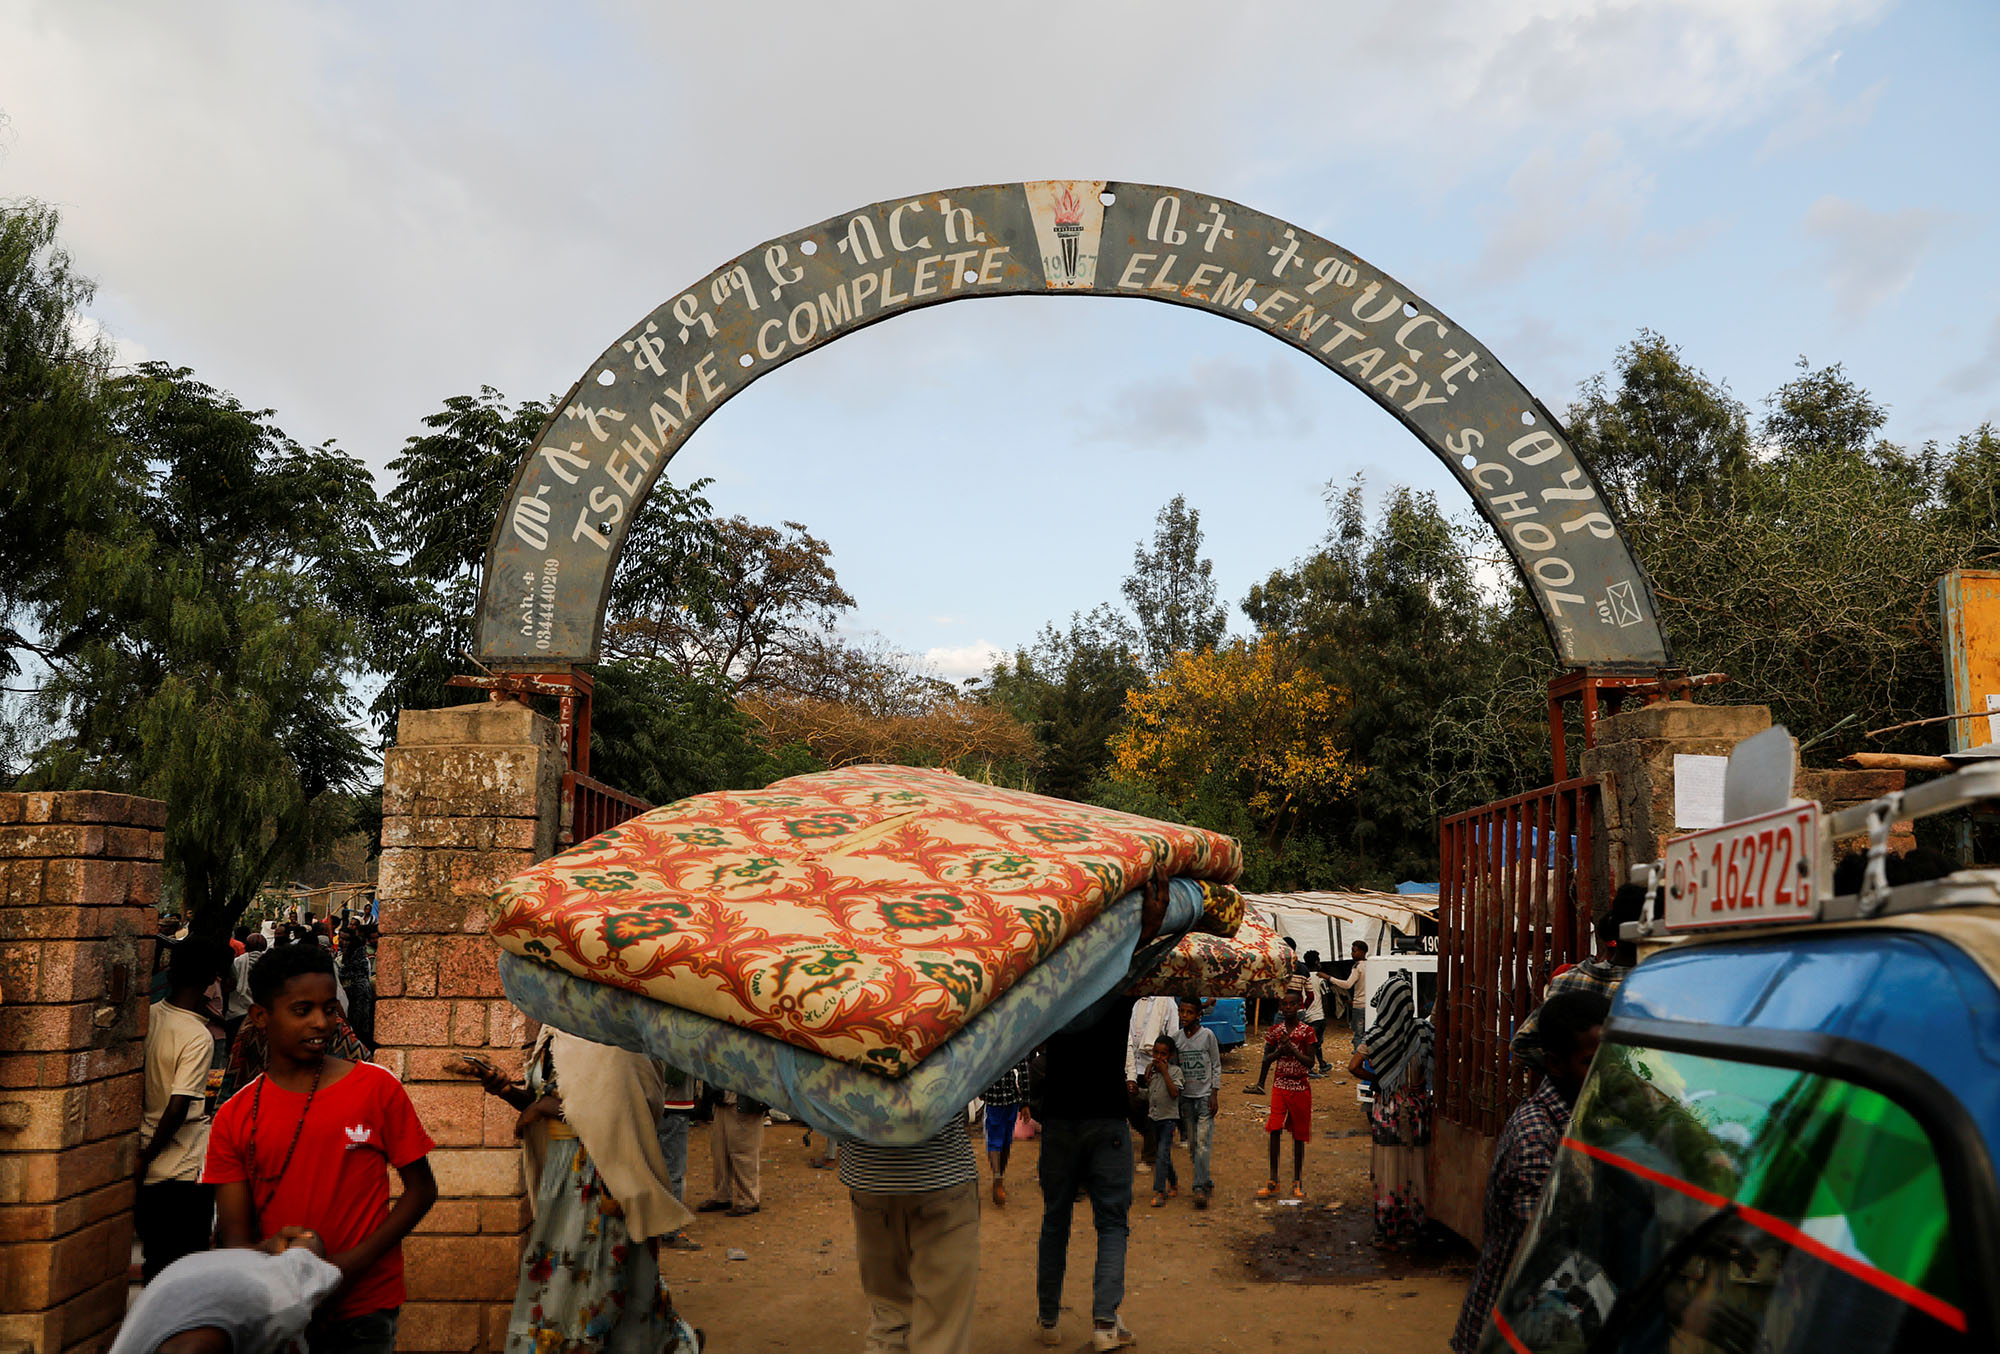 A man carries a mattress into the Tsehaye primary school, which was turned into a temporary shelter for people displaced by conflict, in the town of Shire, Tigray region, Ethiopia on March 15, 2021. 